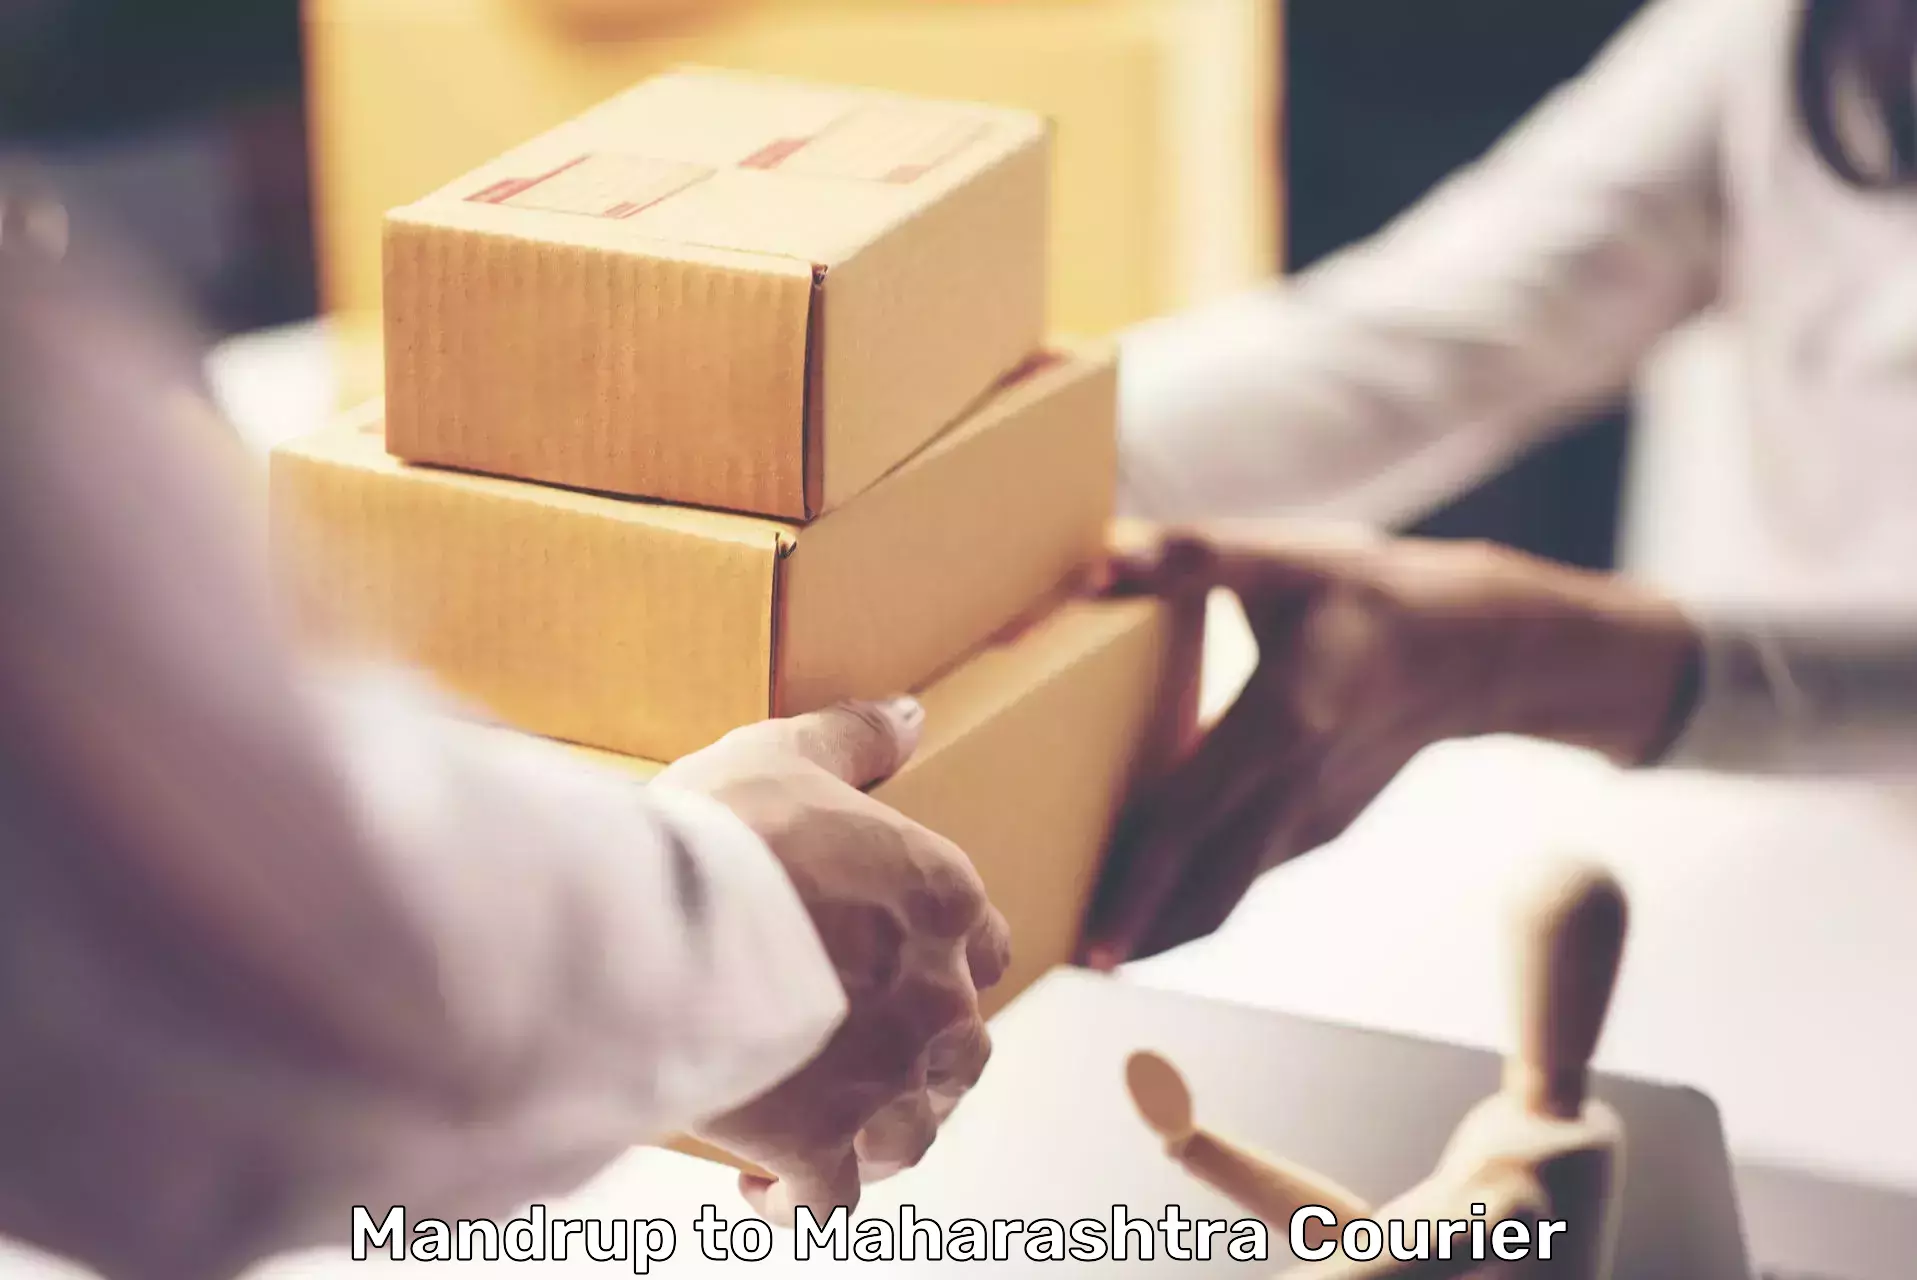 Personalized courier experiences Mandrup to Atpadi